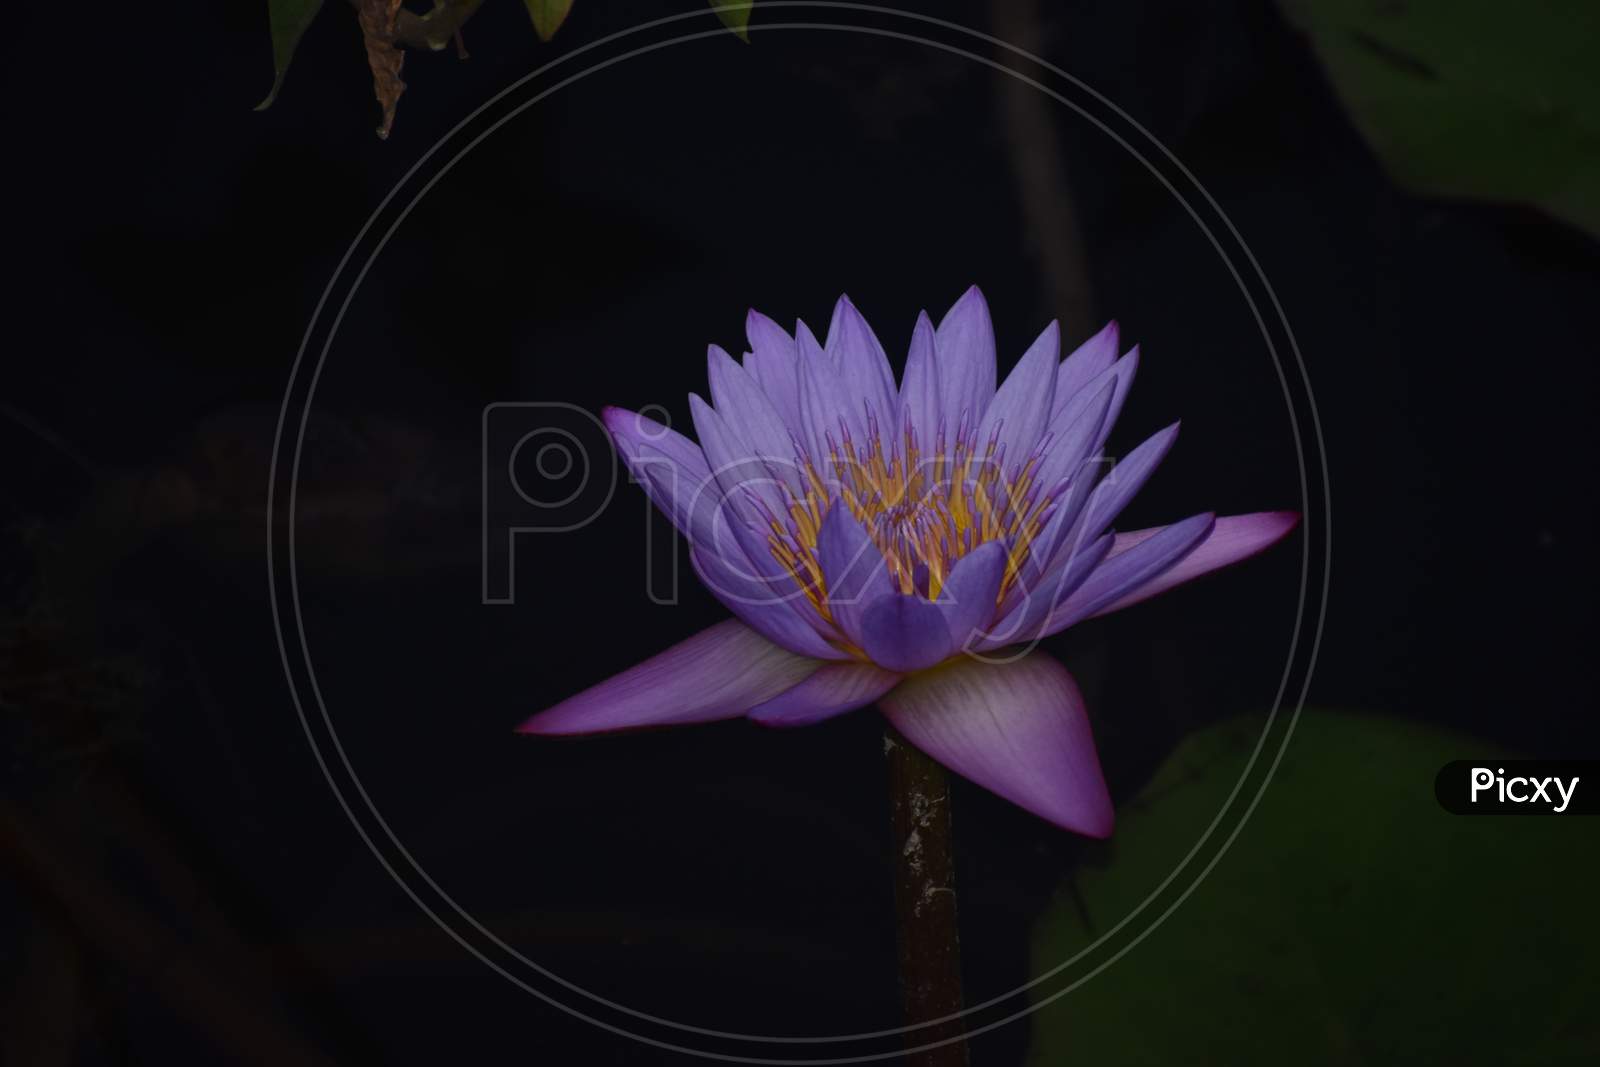 Lily flower in pond in evening